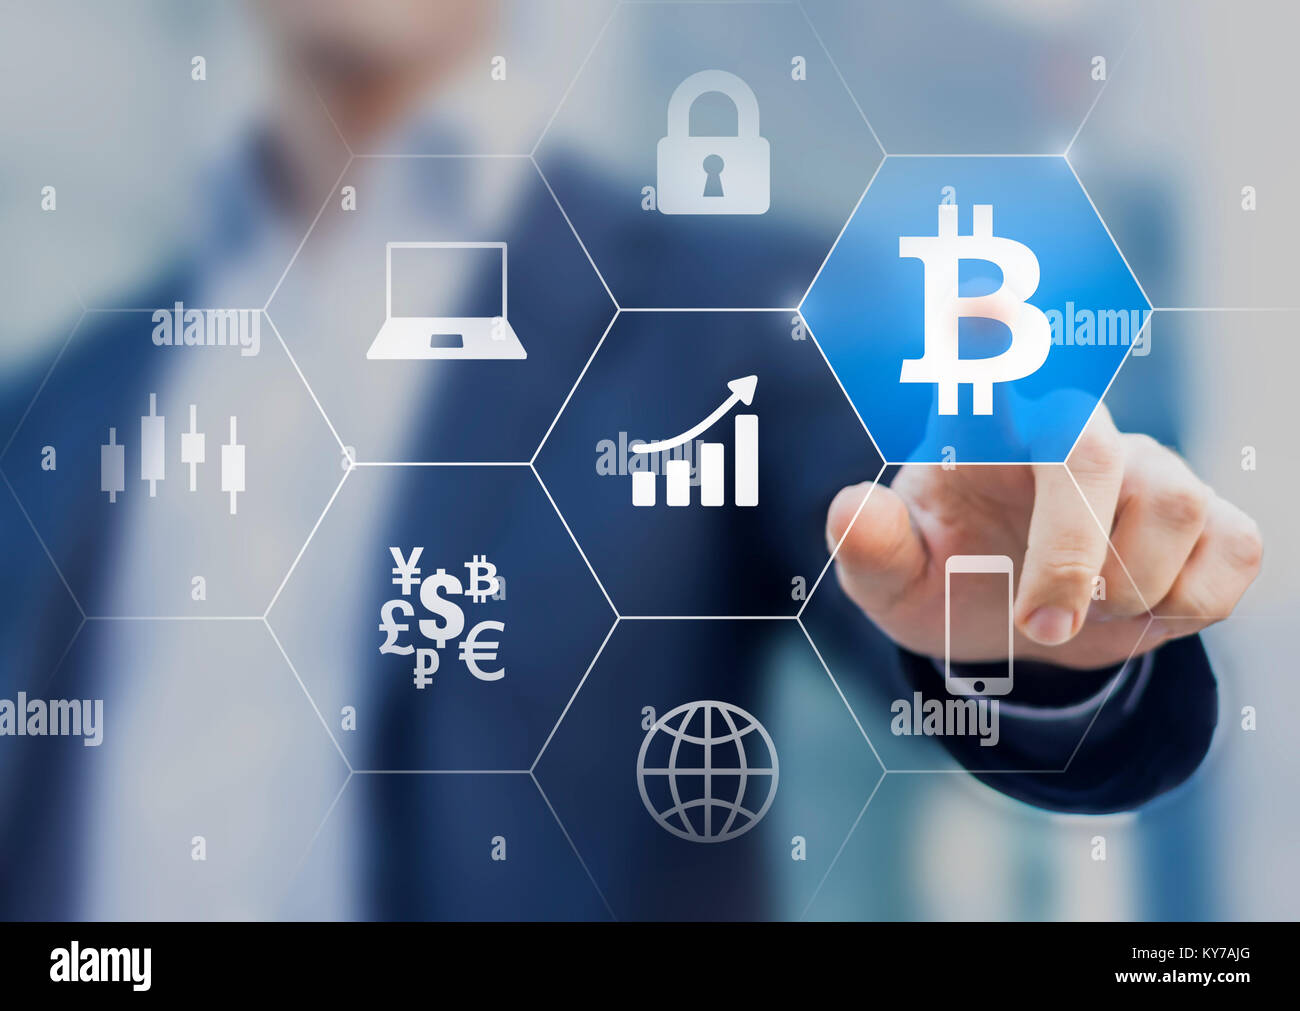 Businessman making successful financial investment in Bitcoin cryptocurrency trading with high ROI, concept with person touching BTC currency symbol o Stock Photo